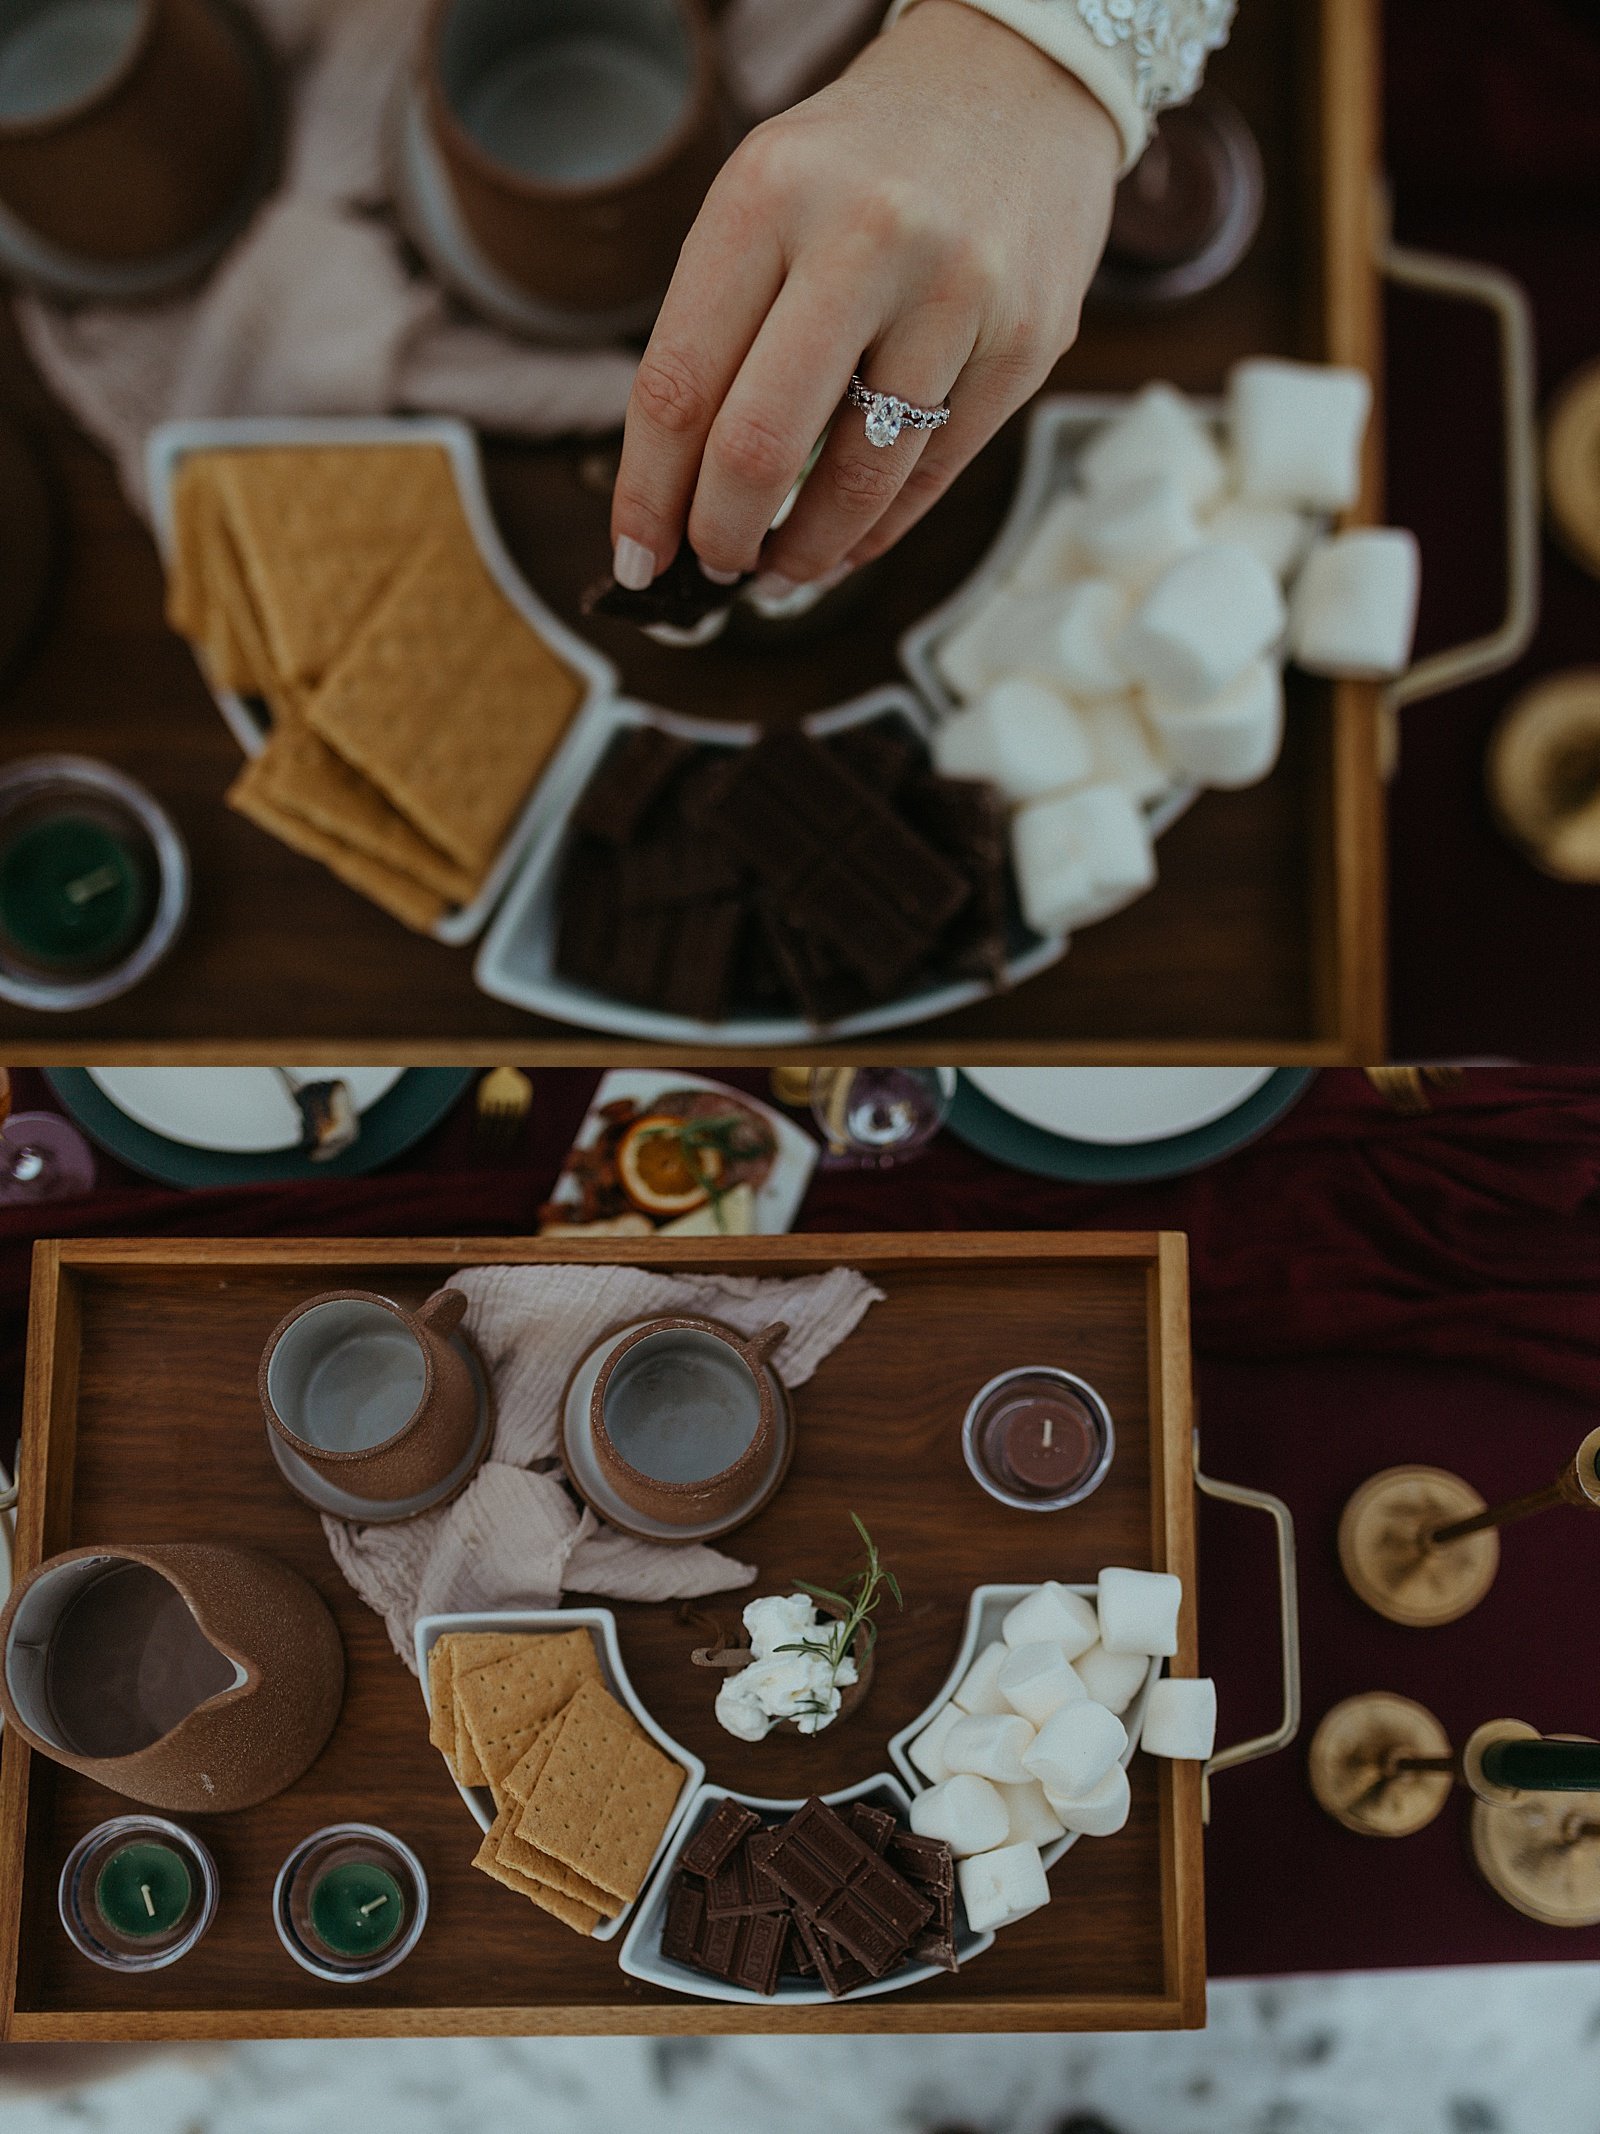  A smore board for private dining for bride and groom at intimate ceremony  